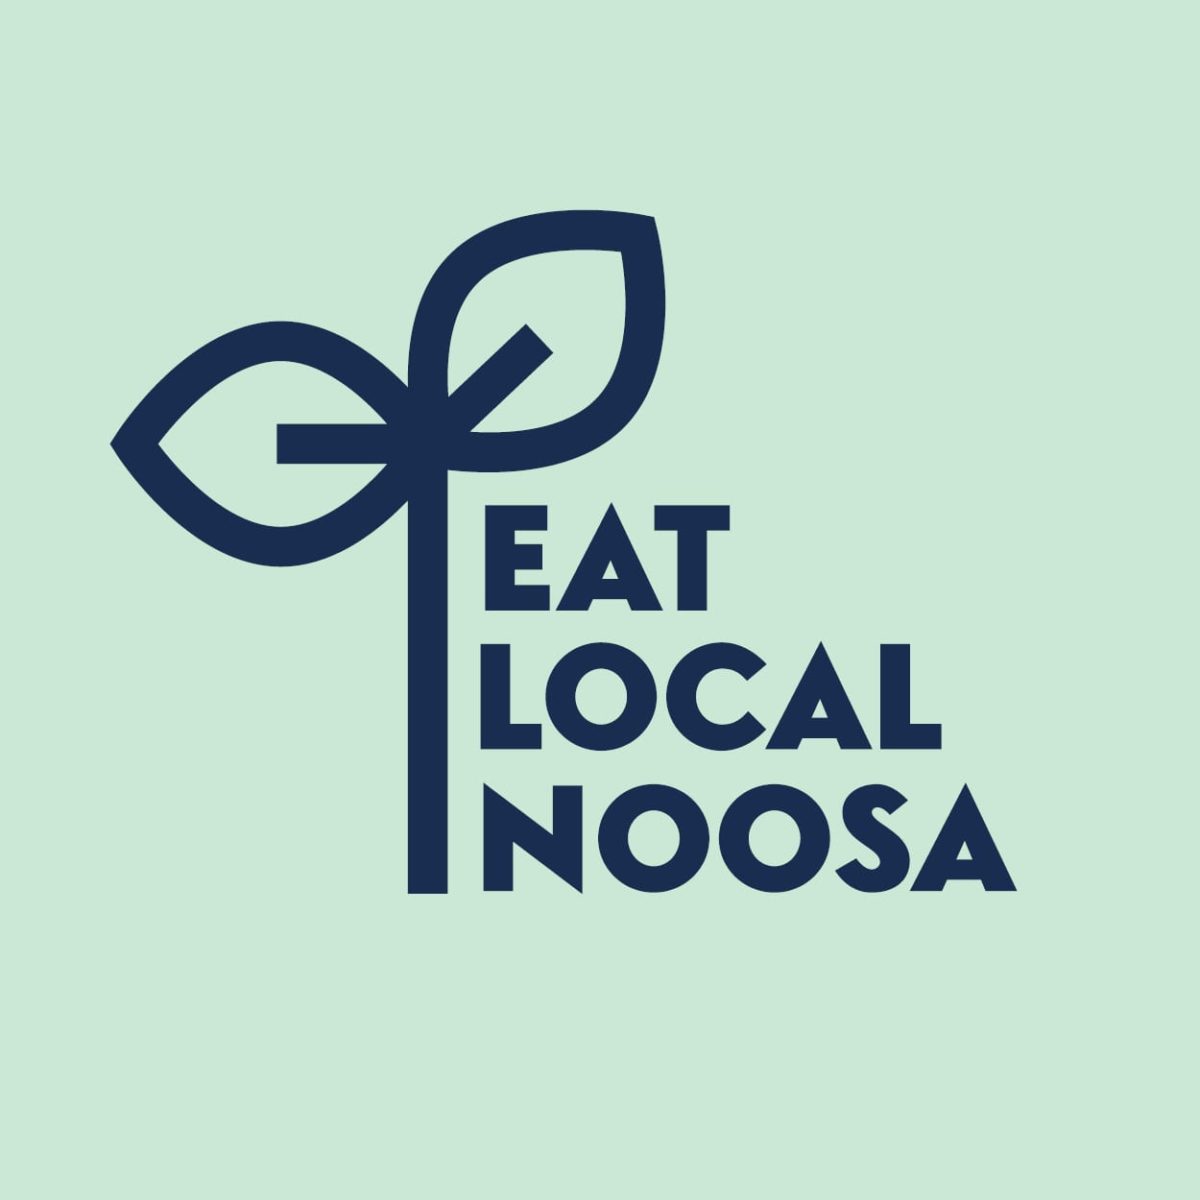 Eat Local Noosa Different Colours Social Posts 600x6004